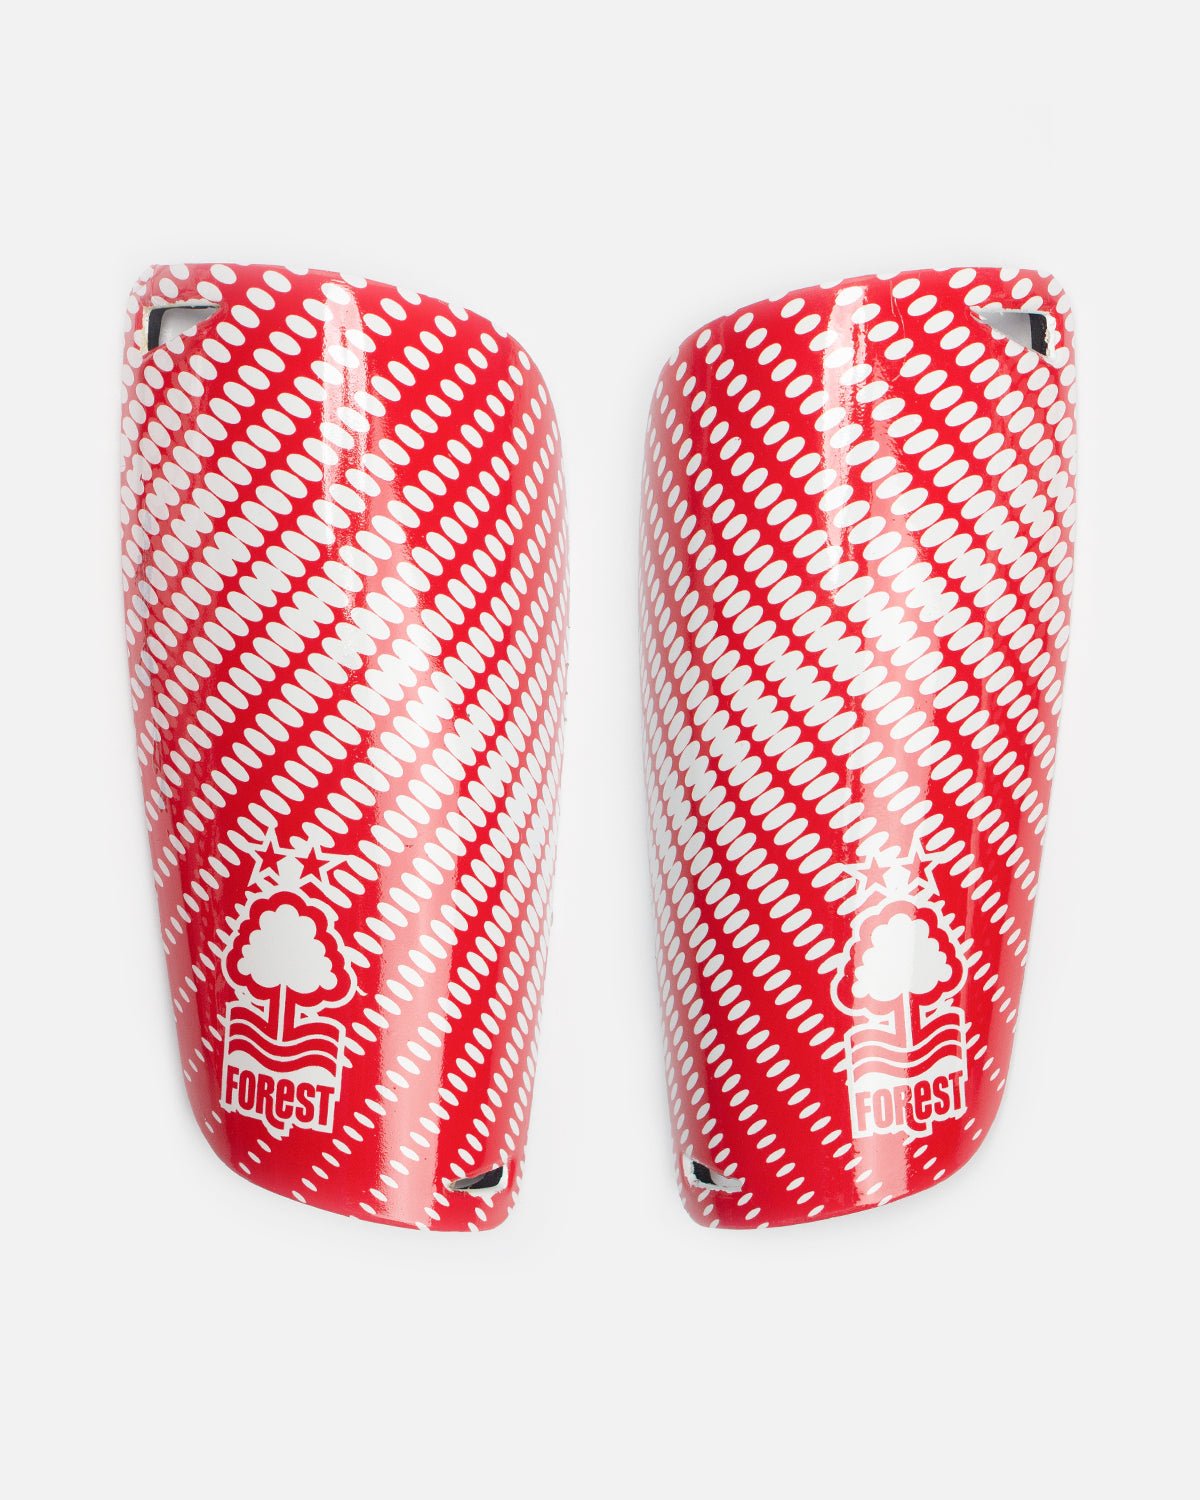 NFFC Shin Pads - Nottingham Forest FC